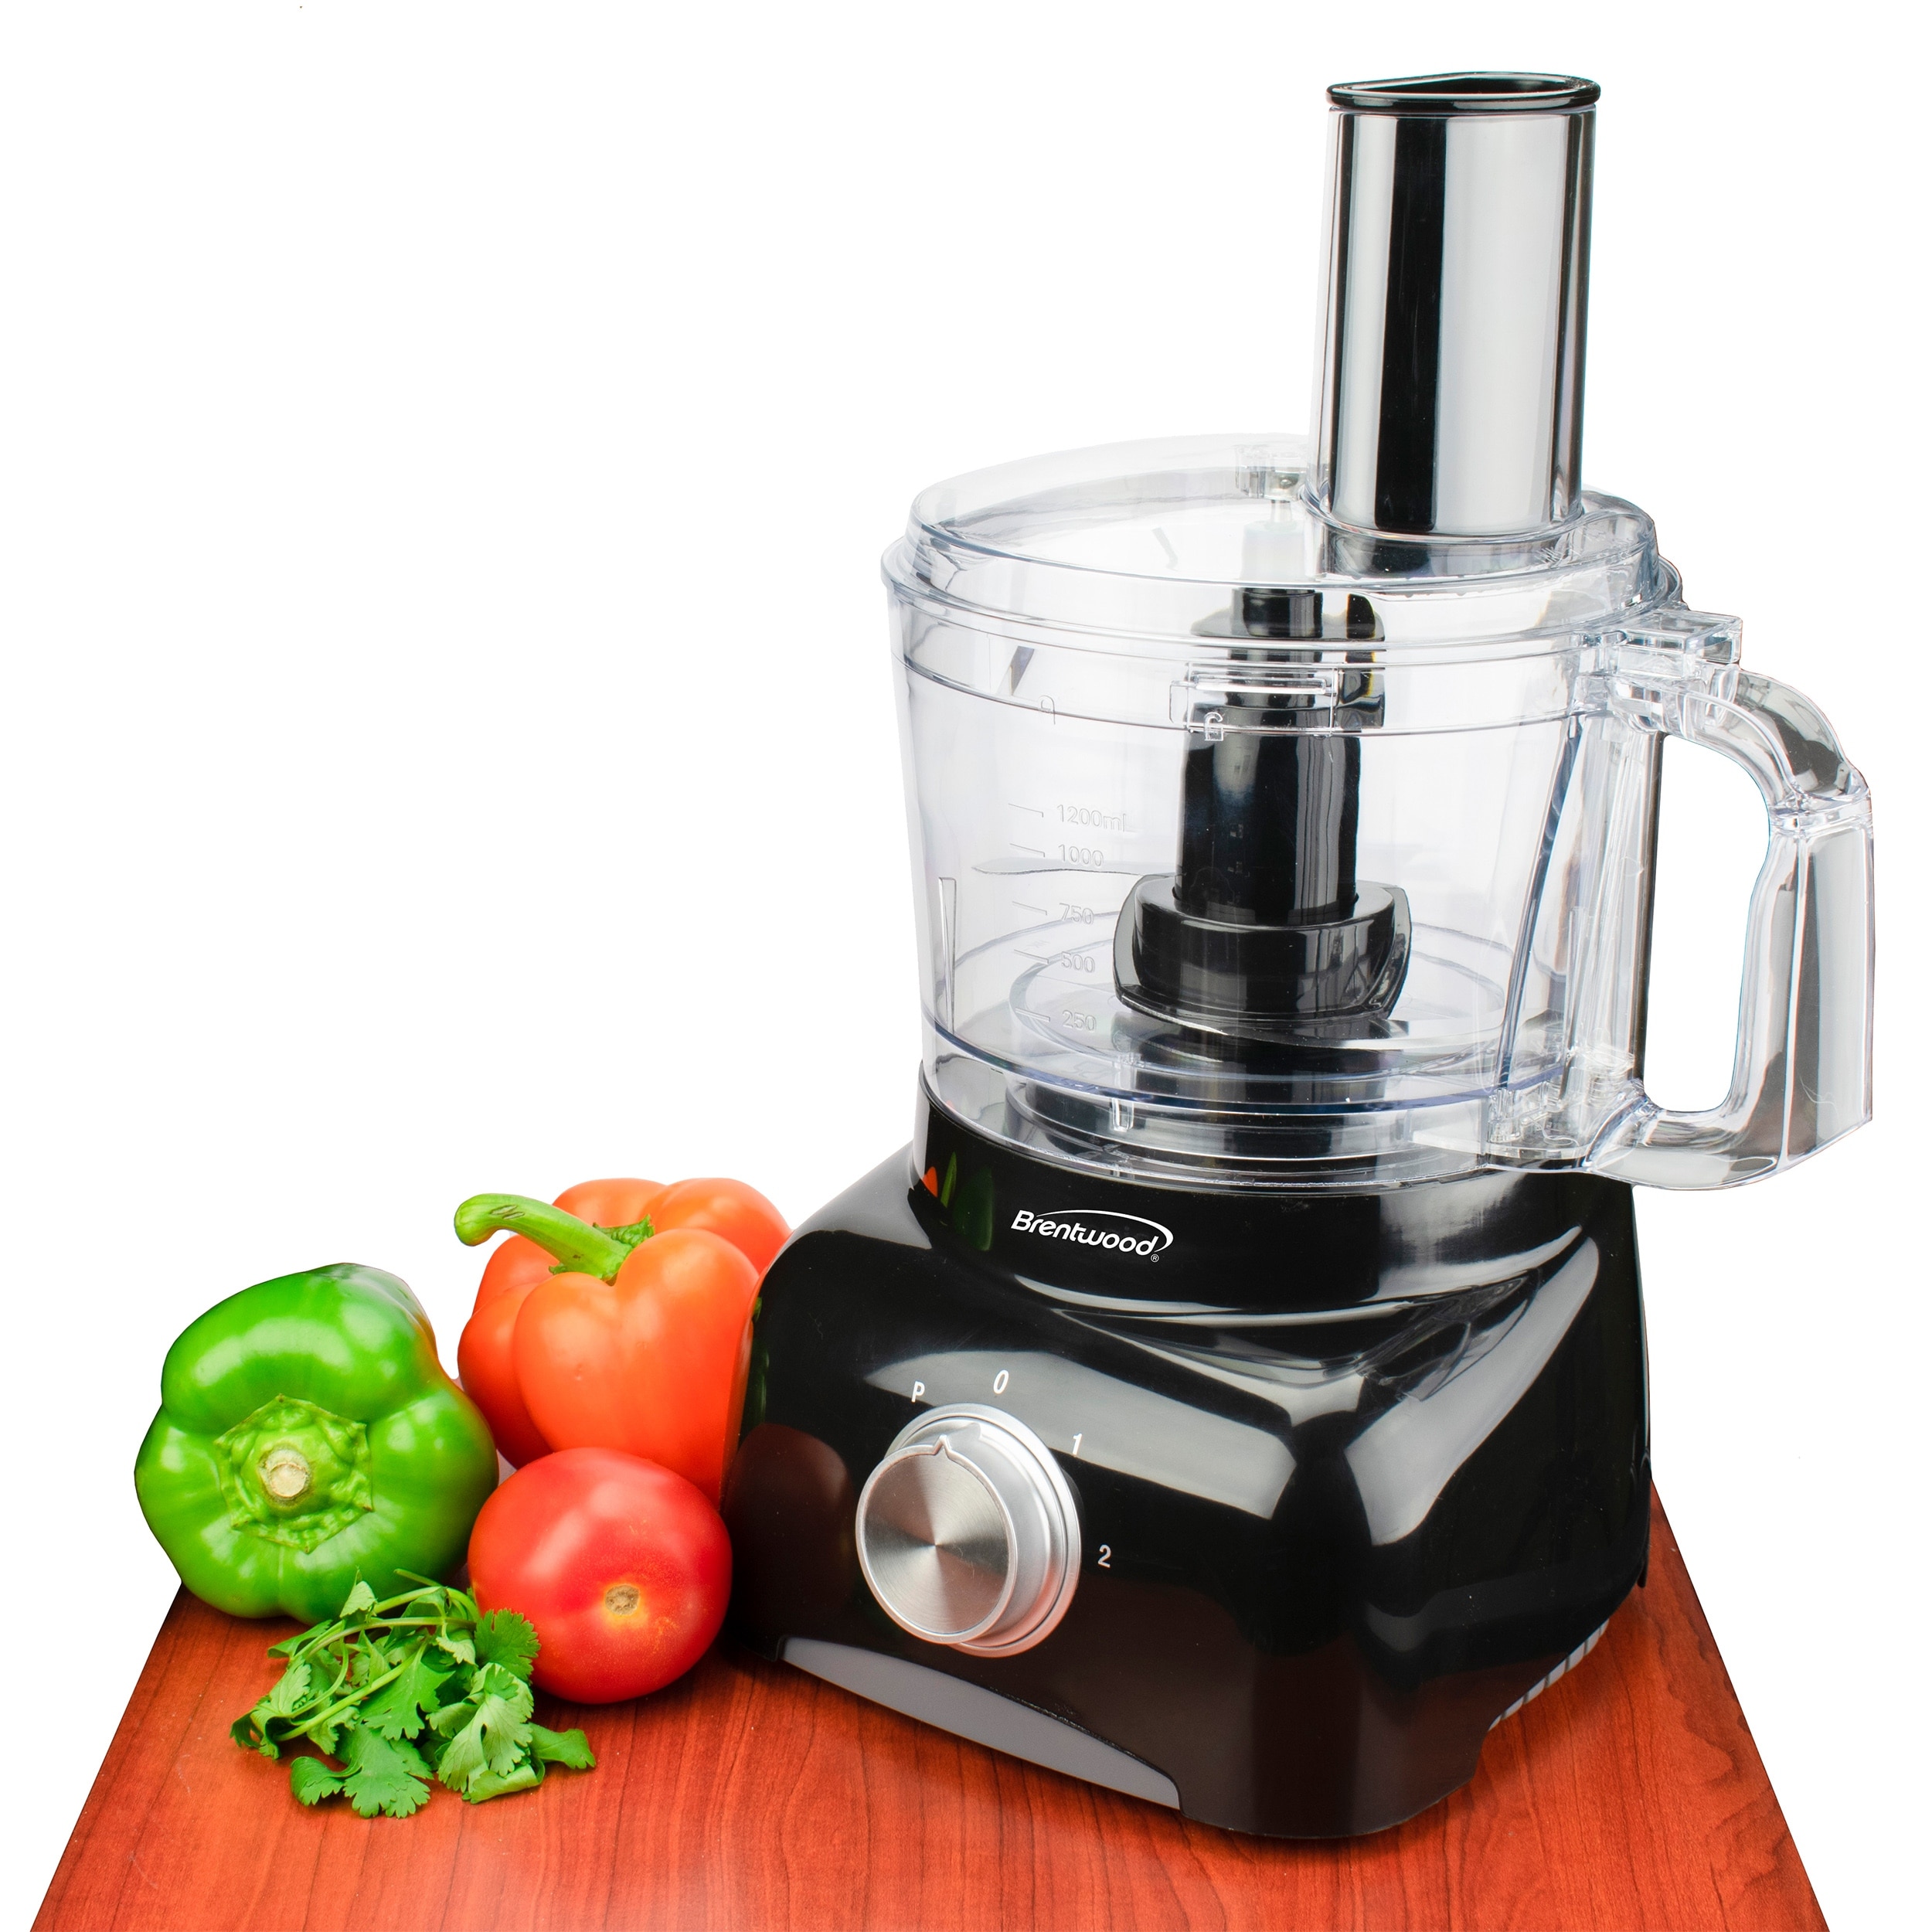 https://ak1.ostkcdn.com/images/products/is/images/direct/f8f52ec26542ed81088c54fe7fbe6a4911cec285/Brentwood-5-Cup-Food-Processor-in-Black.jpg